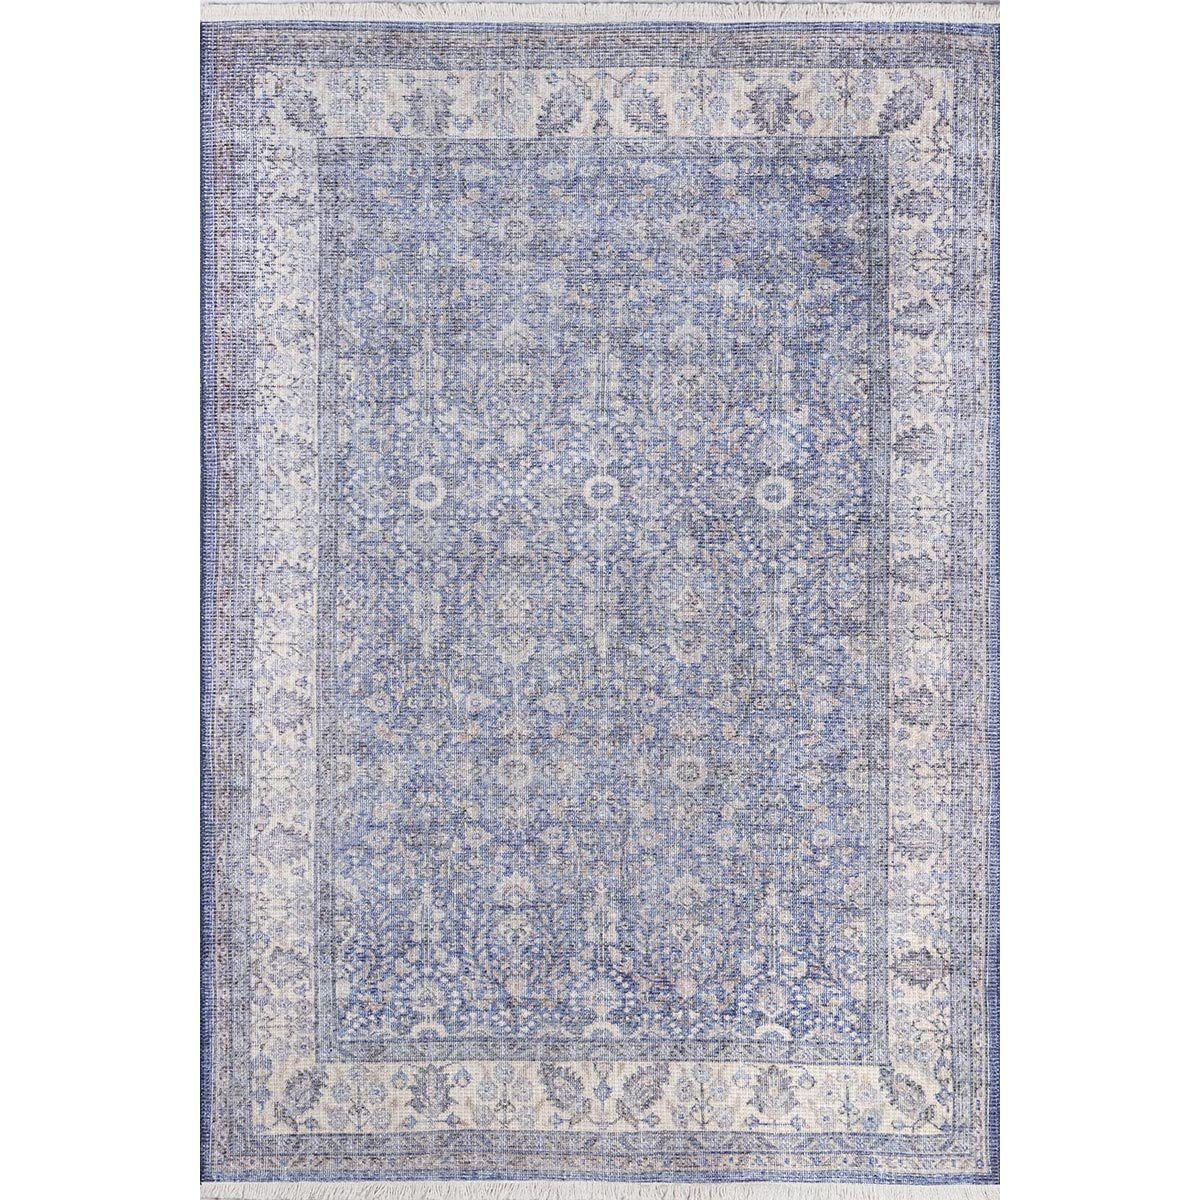 Finlay Rug - Blue 2' X 3'. Top view.